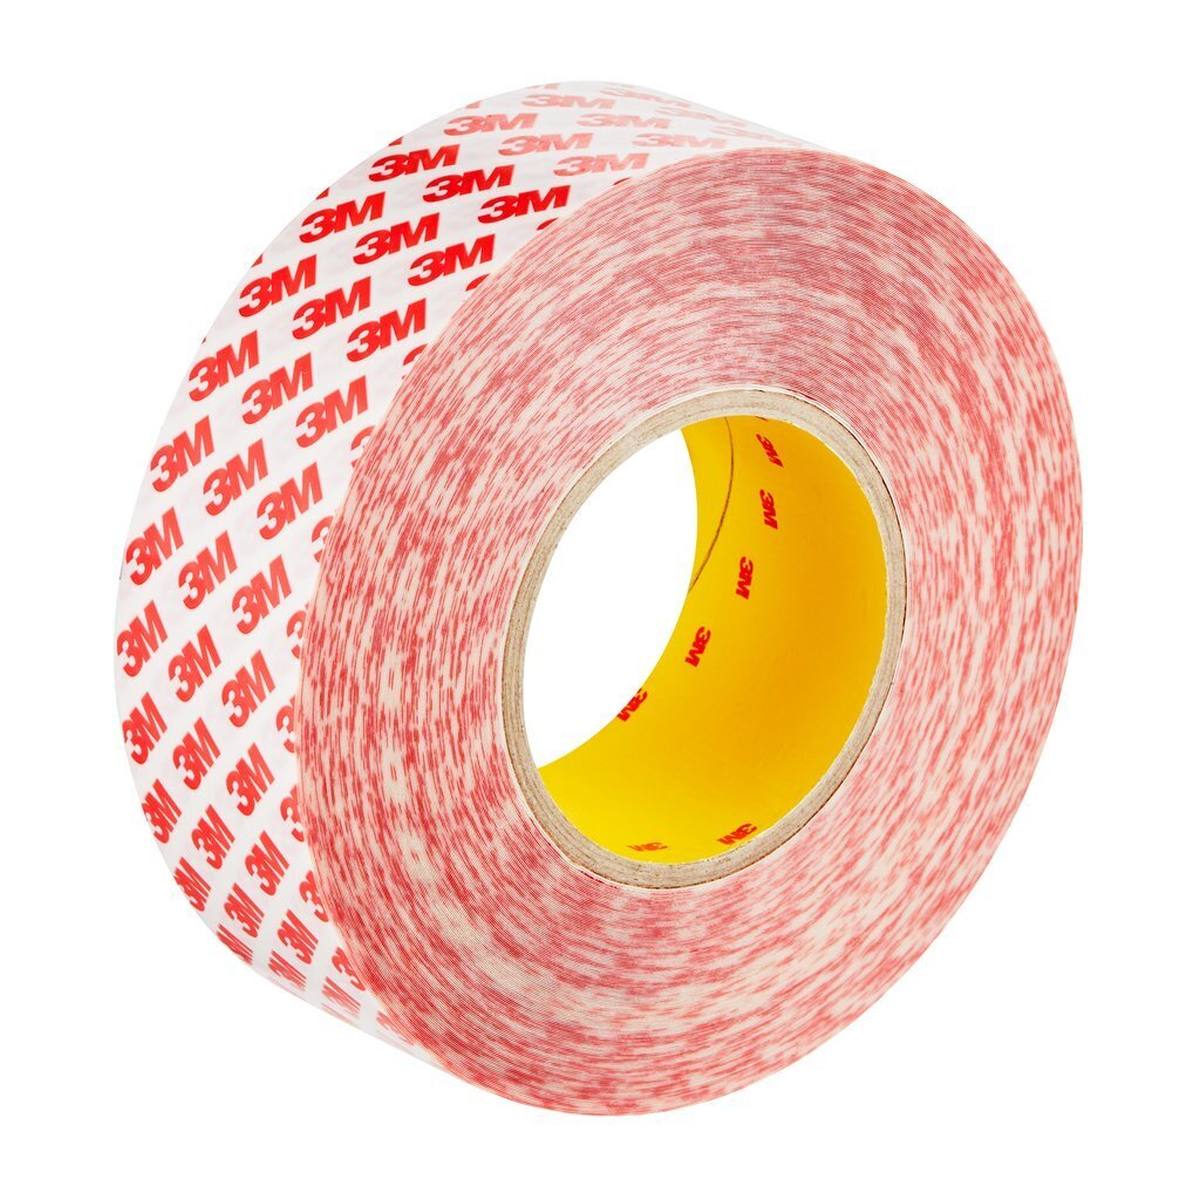 3M Double-sided adhesive tape with polyester backing GPT-020F, transparent, 50 mm x 50 m, 0.202 mm